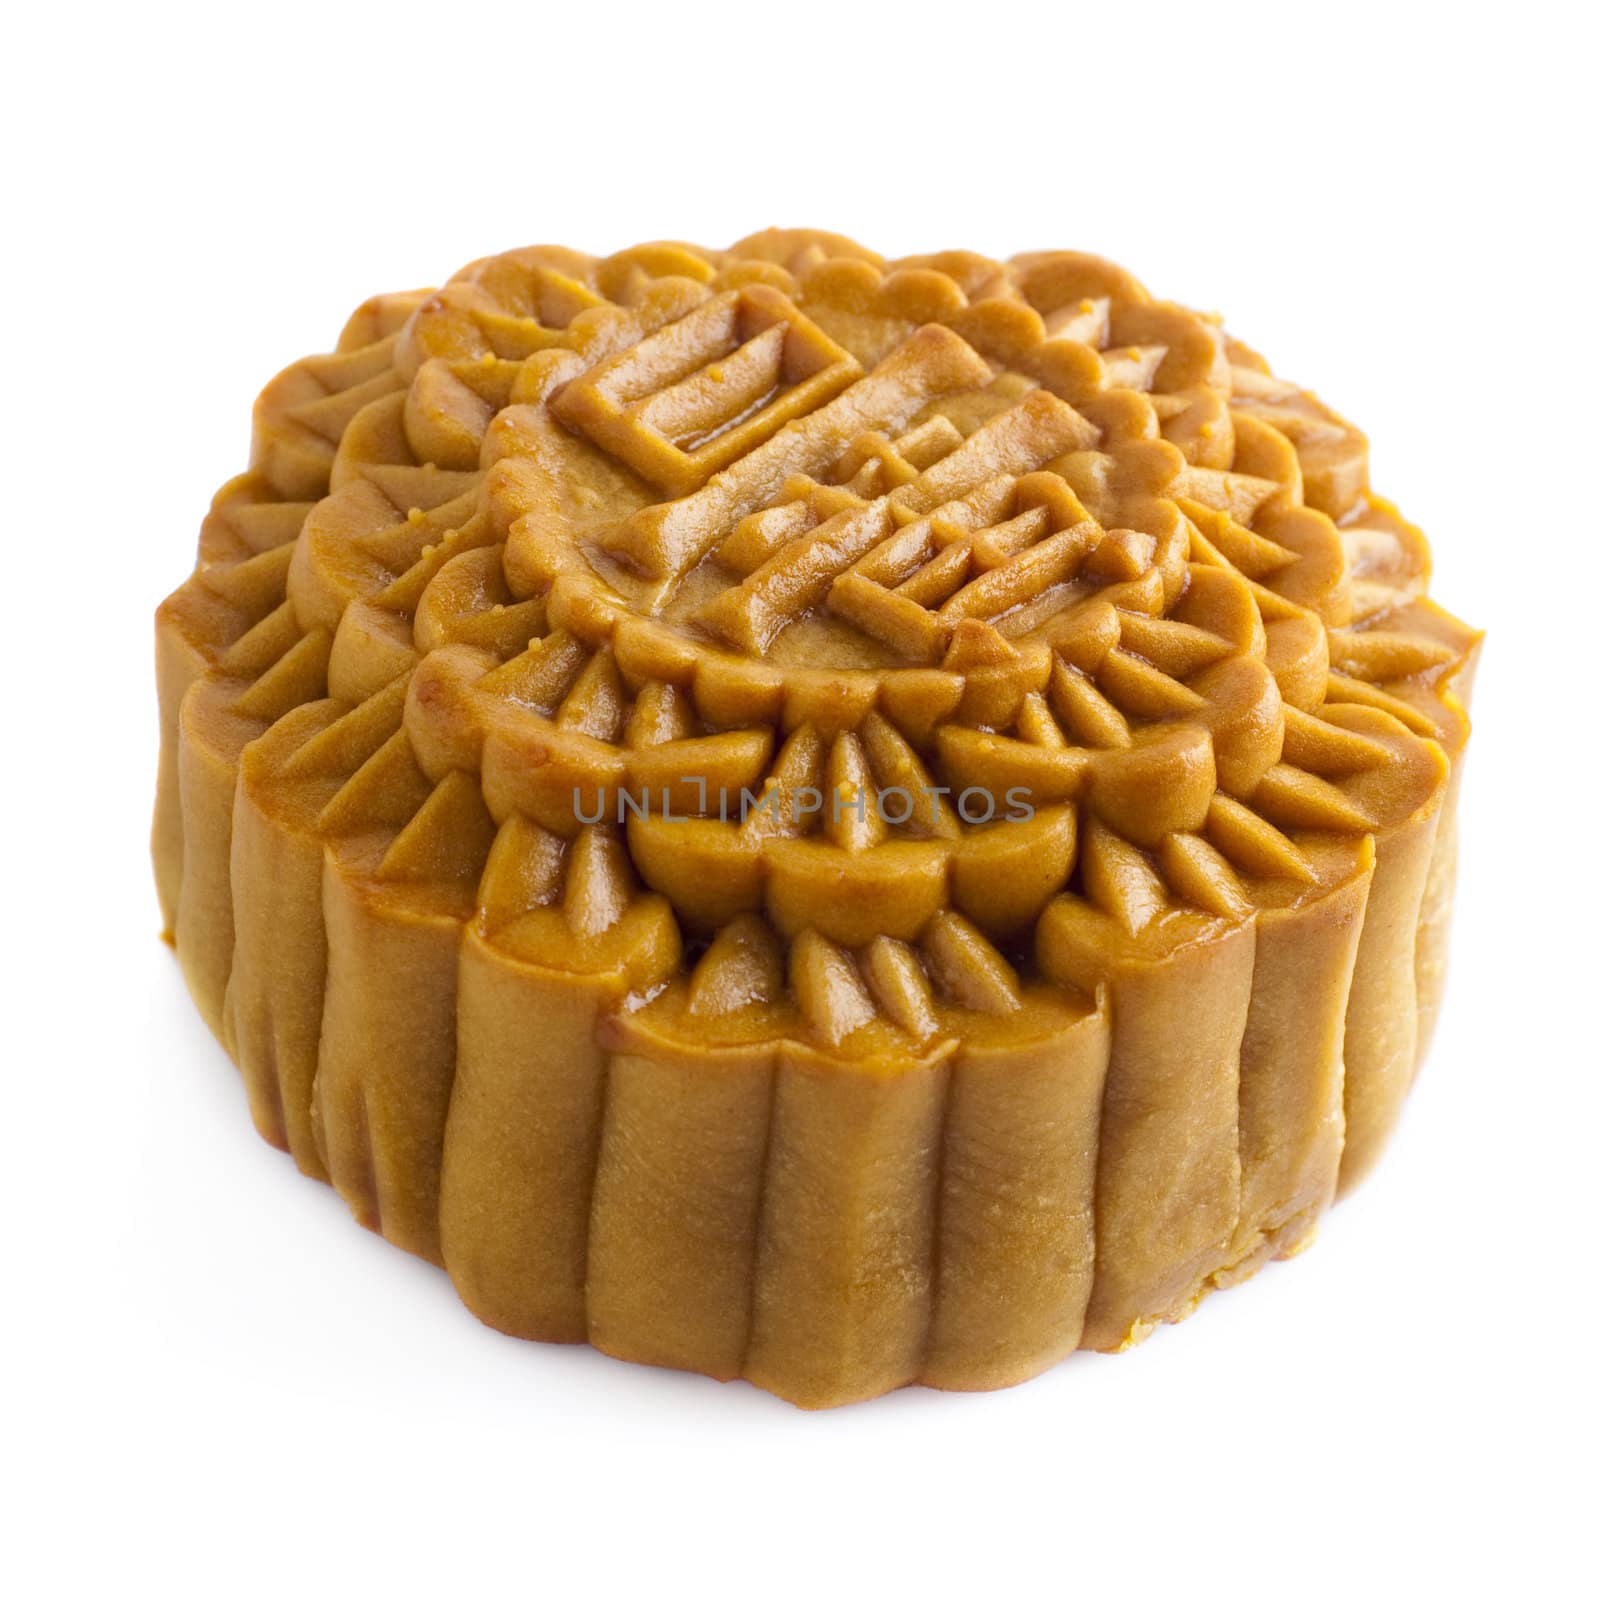 Chinese Mooncake, the Chinese words on the mooncake is' yolk', not logo or trademark.